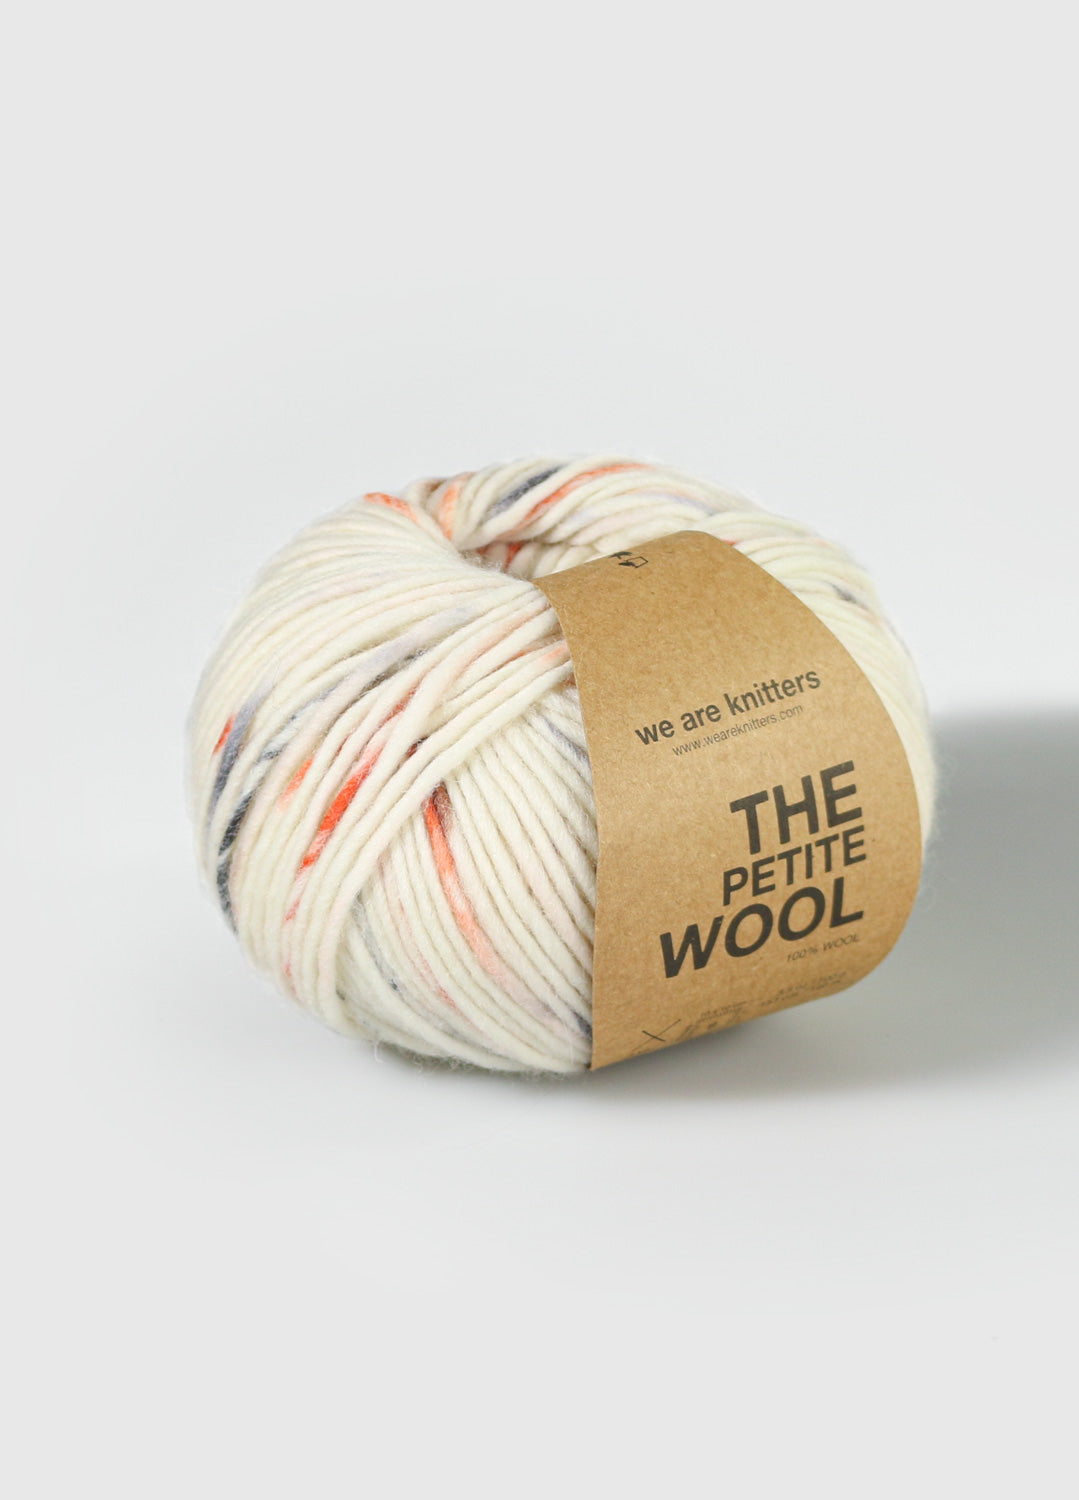 The Petite Wool-Spotted Mauve